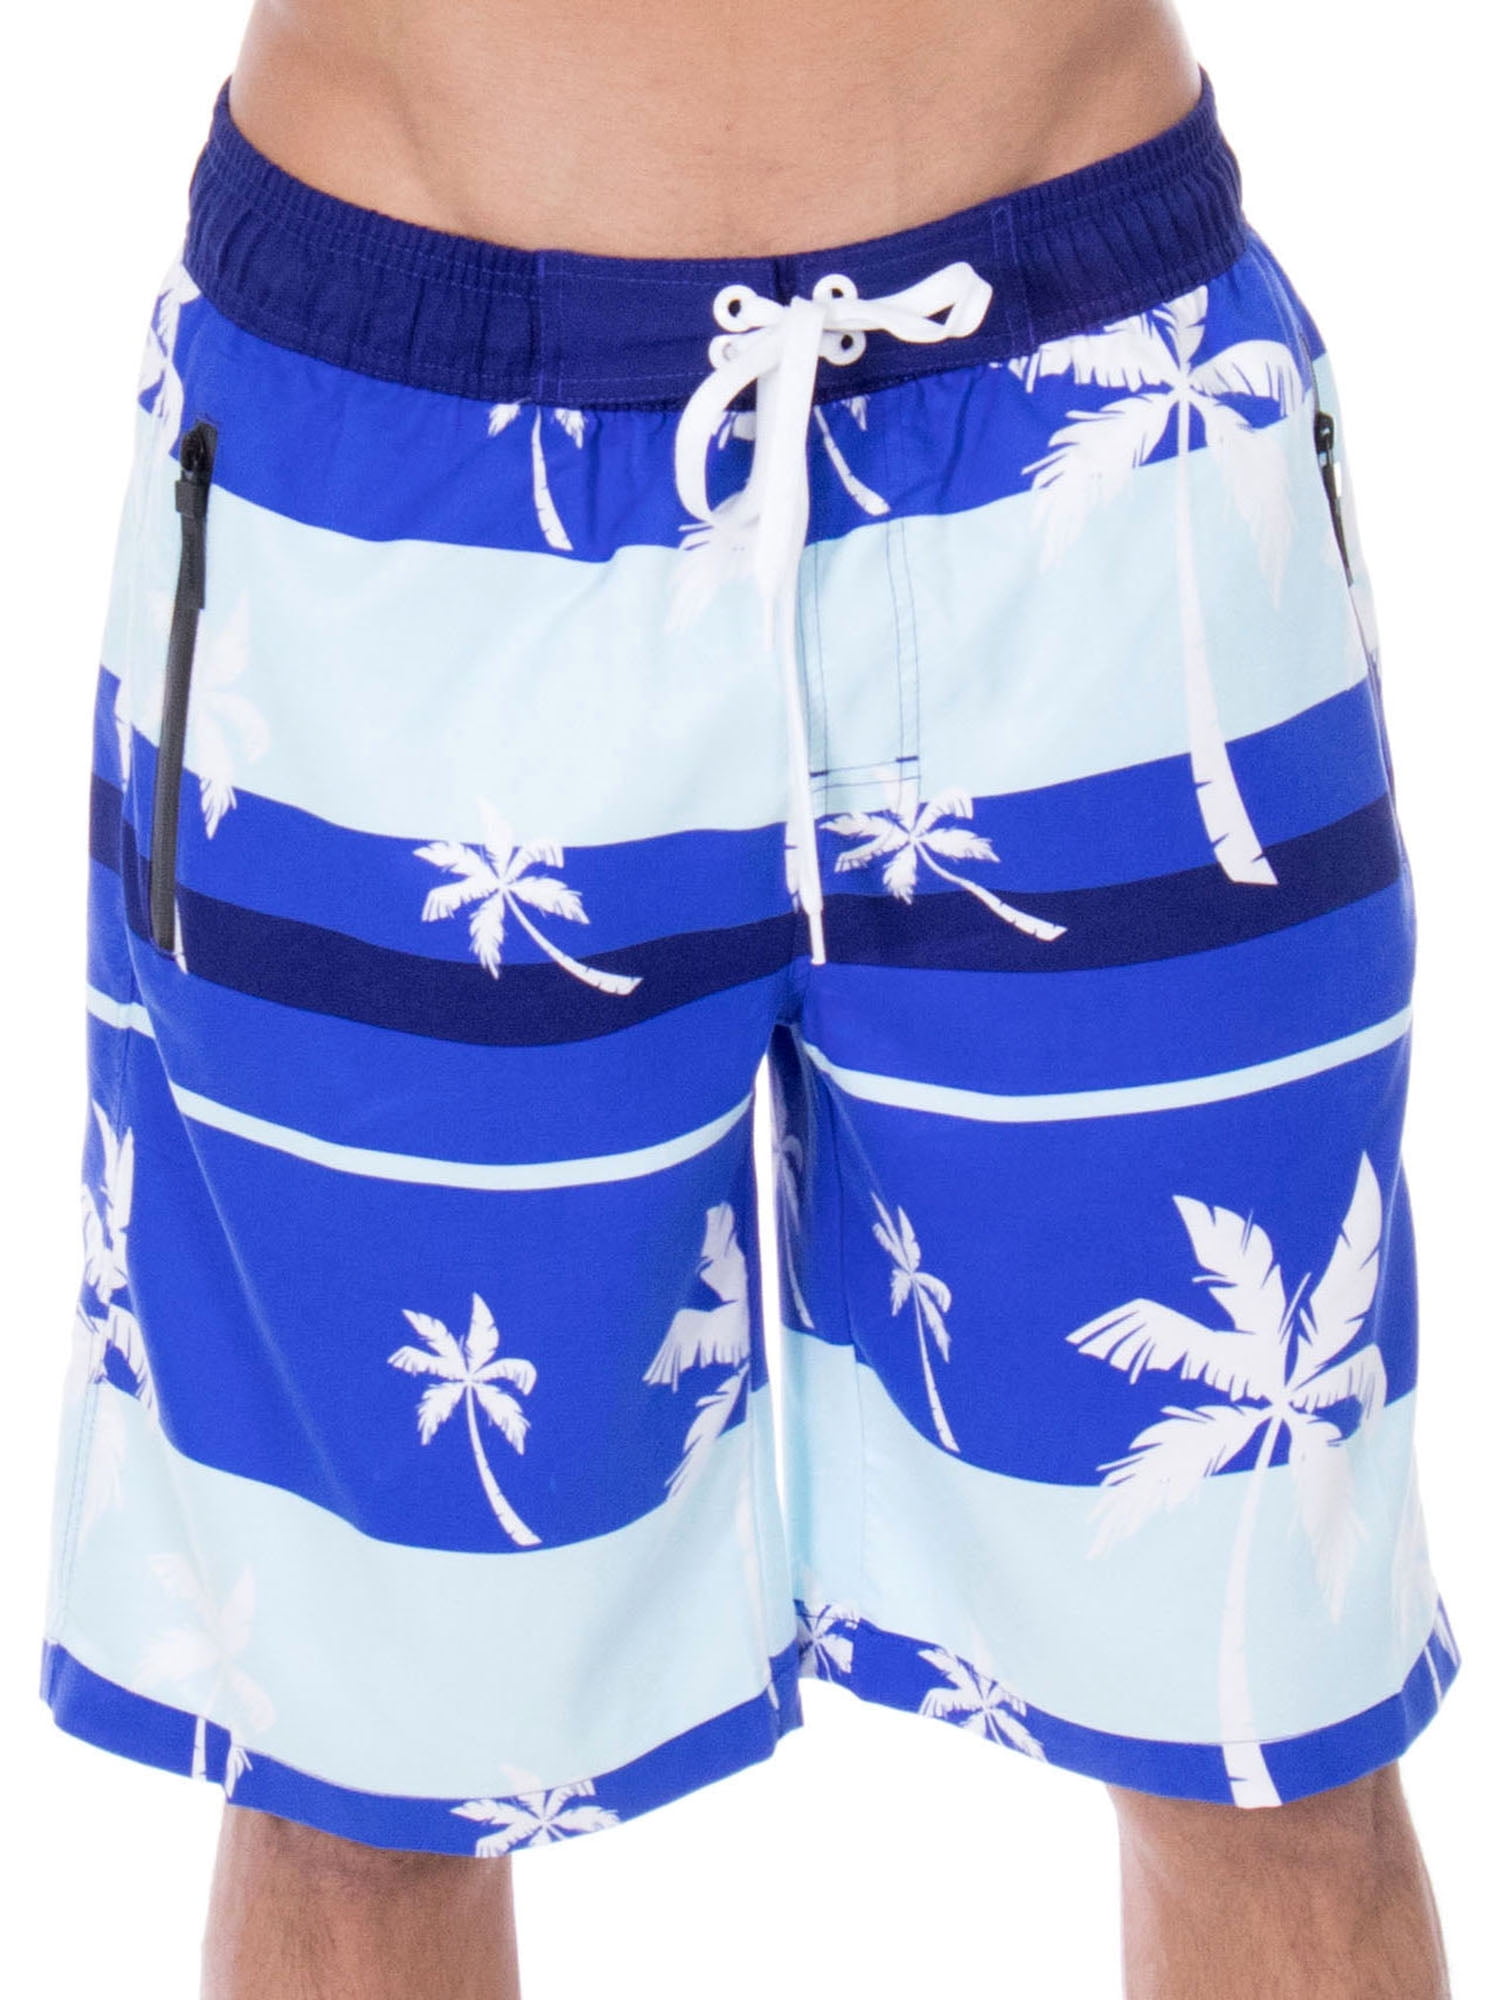 Big and Tall Mens Swim Trunks Board Shorts with Pockets,2X-Large ...